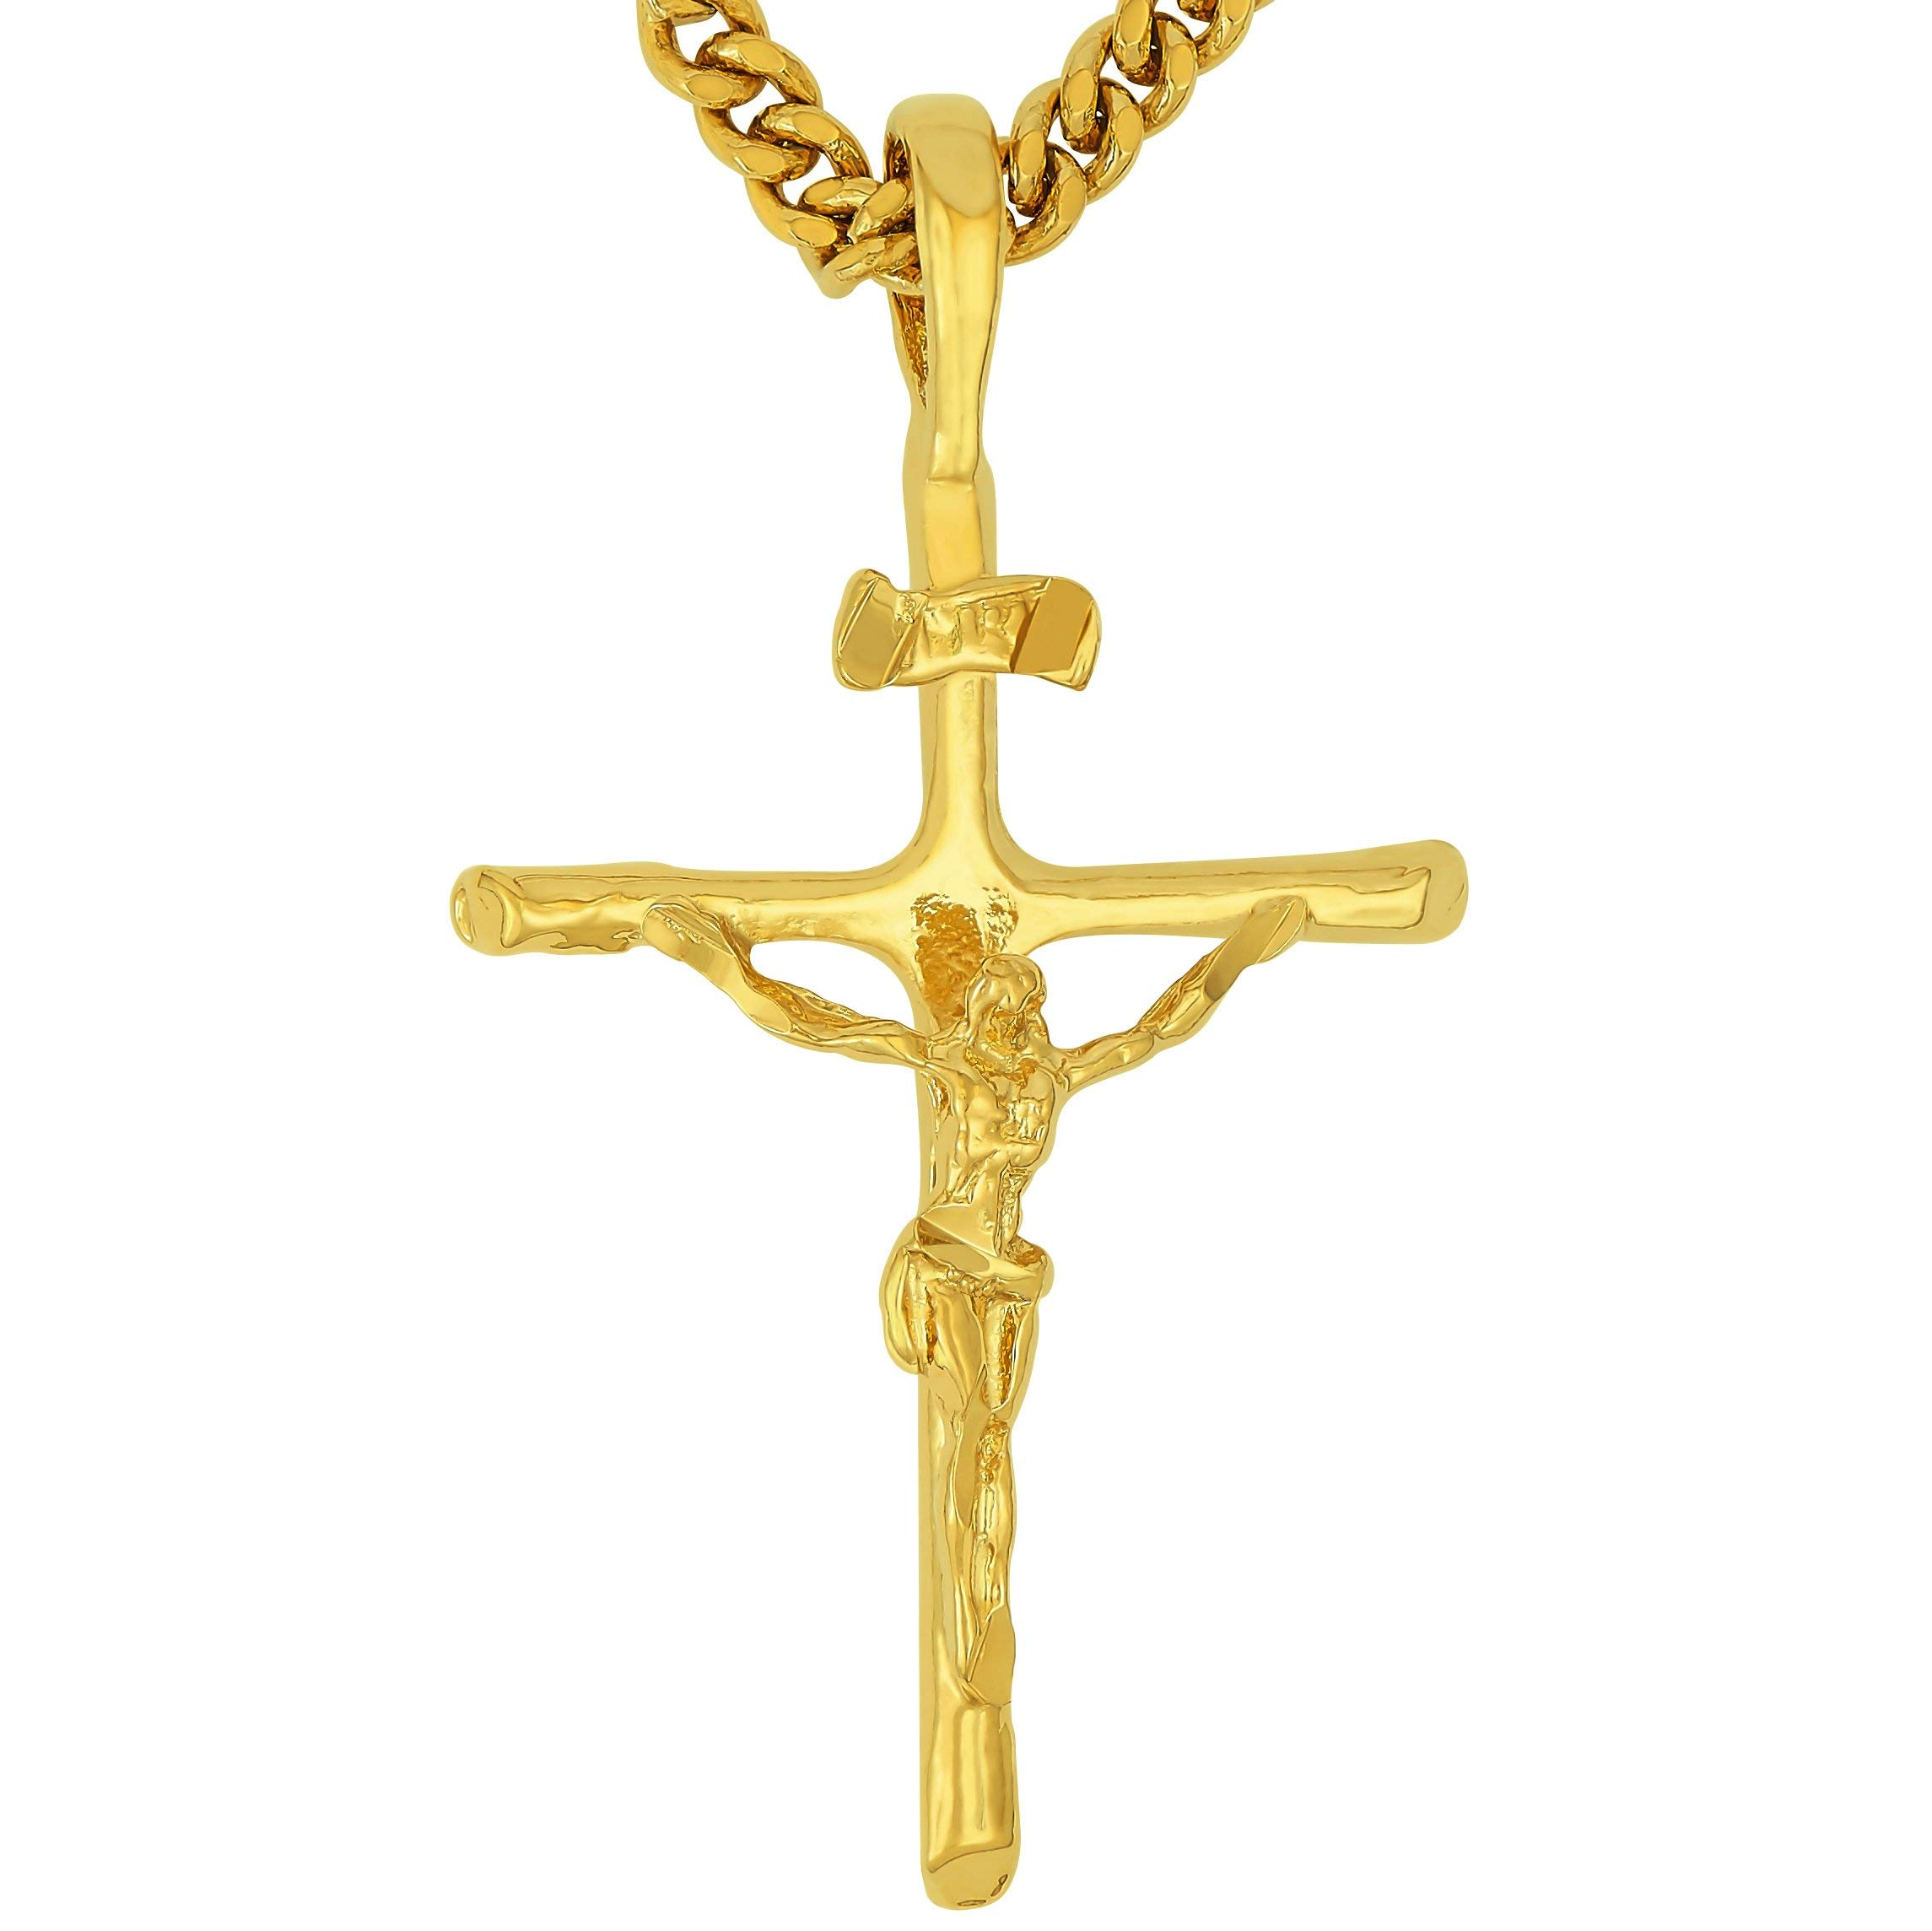 LIFETIME JEWELRY Classic Cross Necklace for Men & Women 24k Real Gold Plated